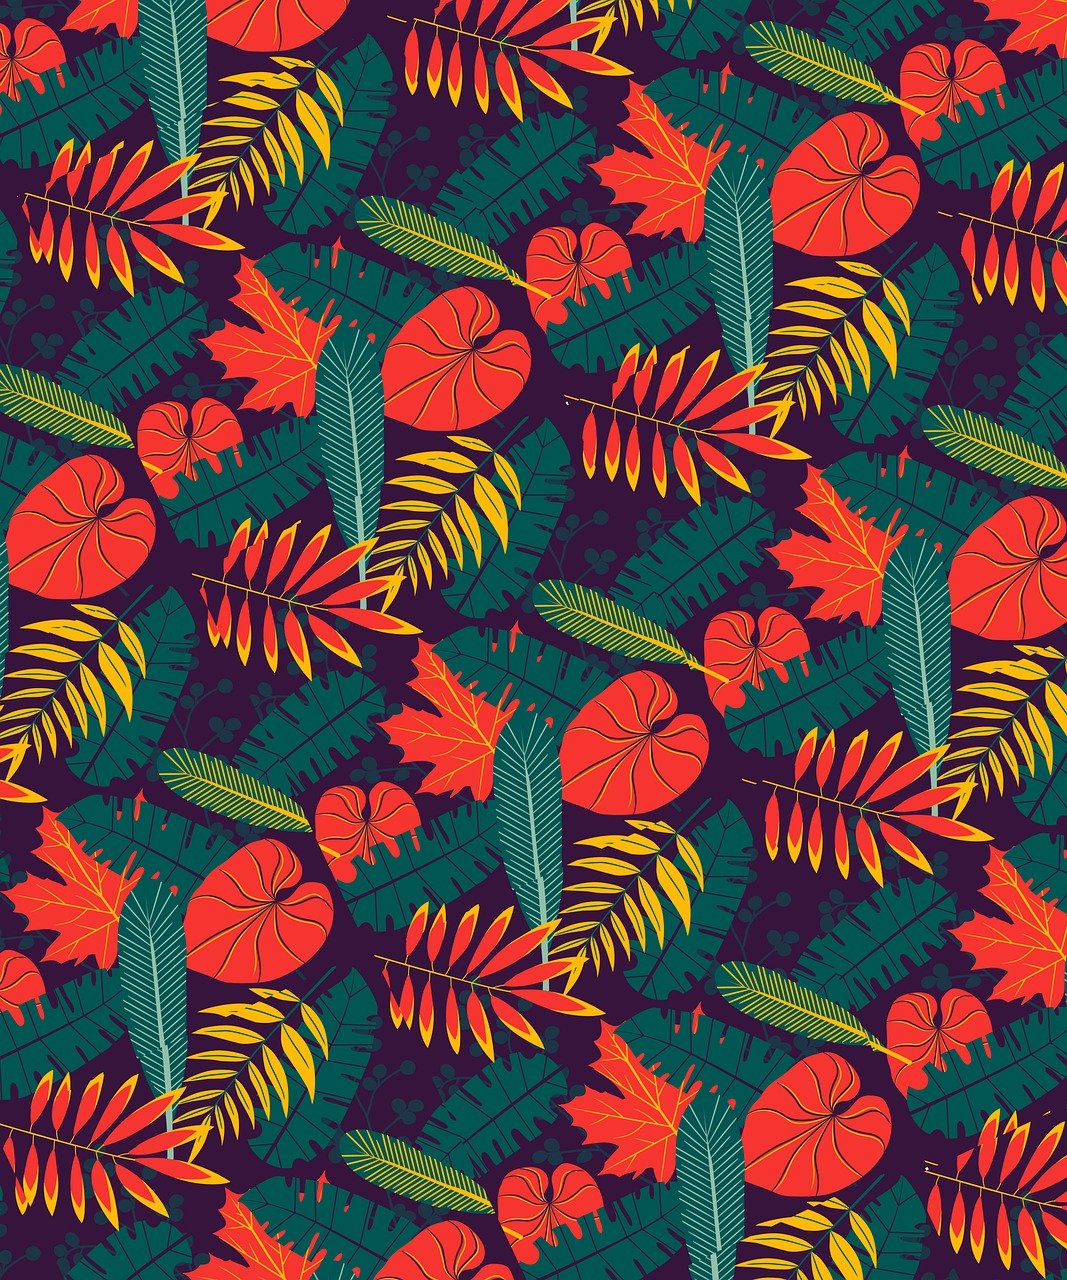 a pattern of leaves and flowers on a dark background, vivid and vibrant, tropical style, red orange and yellow leaves, stylised flat colors